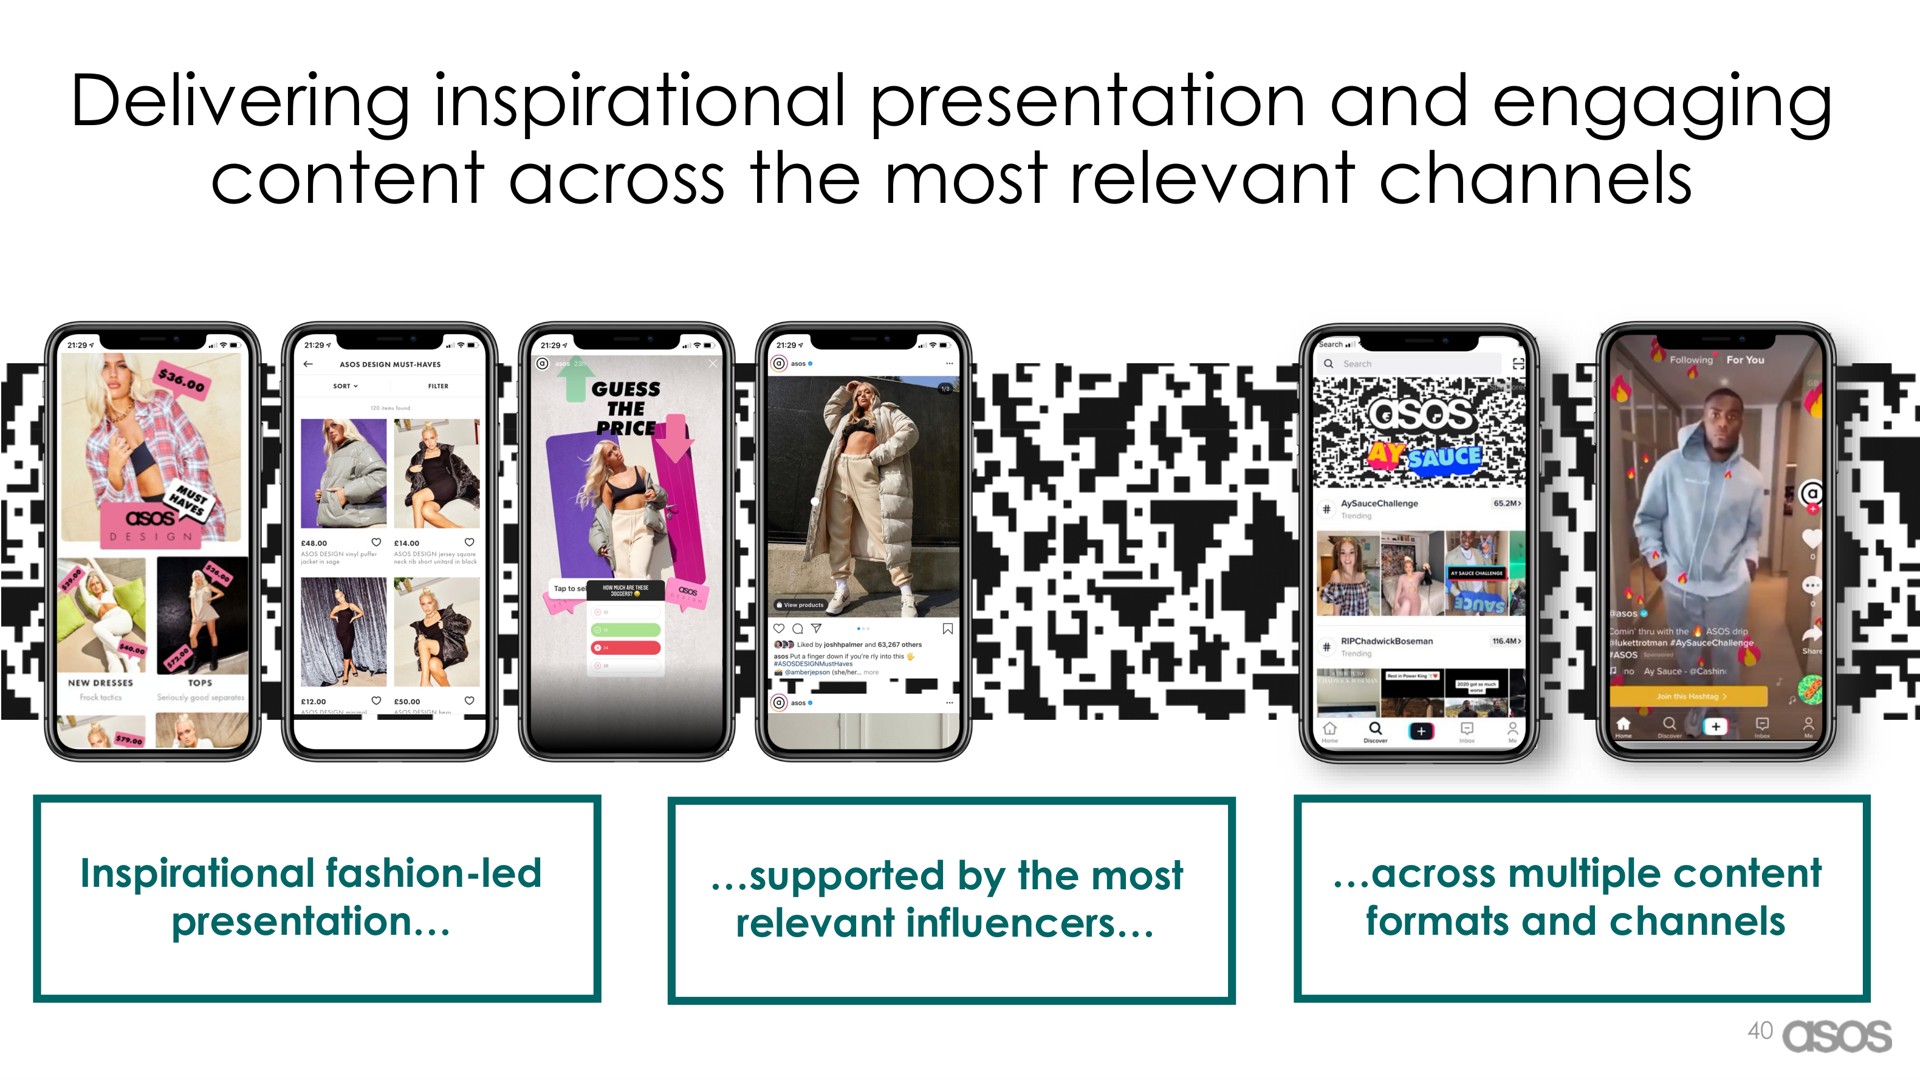 delivering inspirational presentation and engaging content across the most relevant channels | Asos